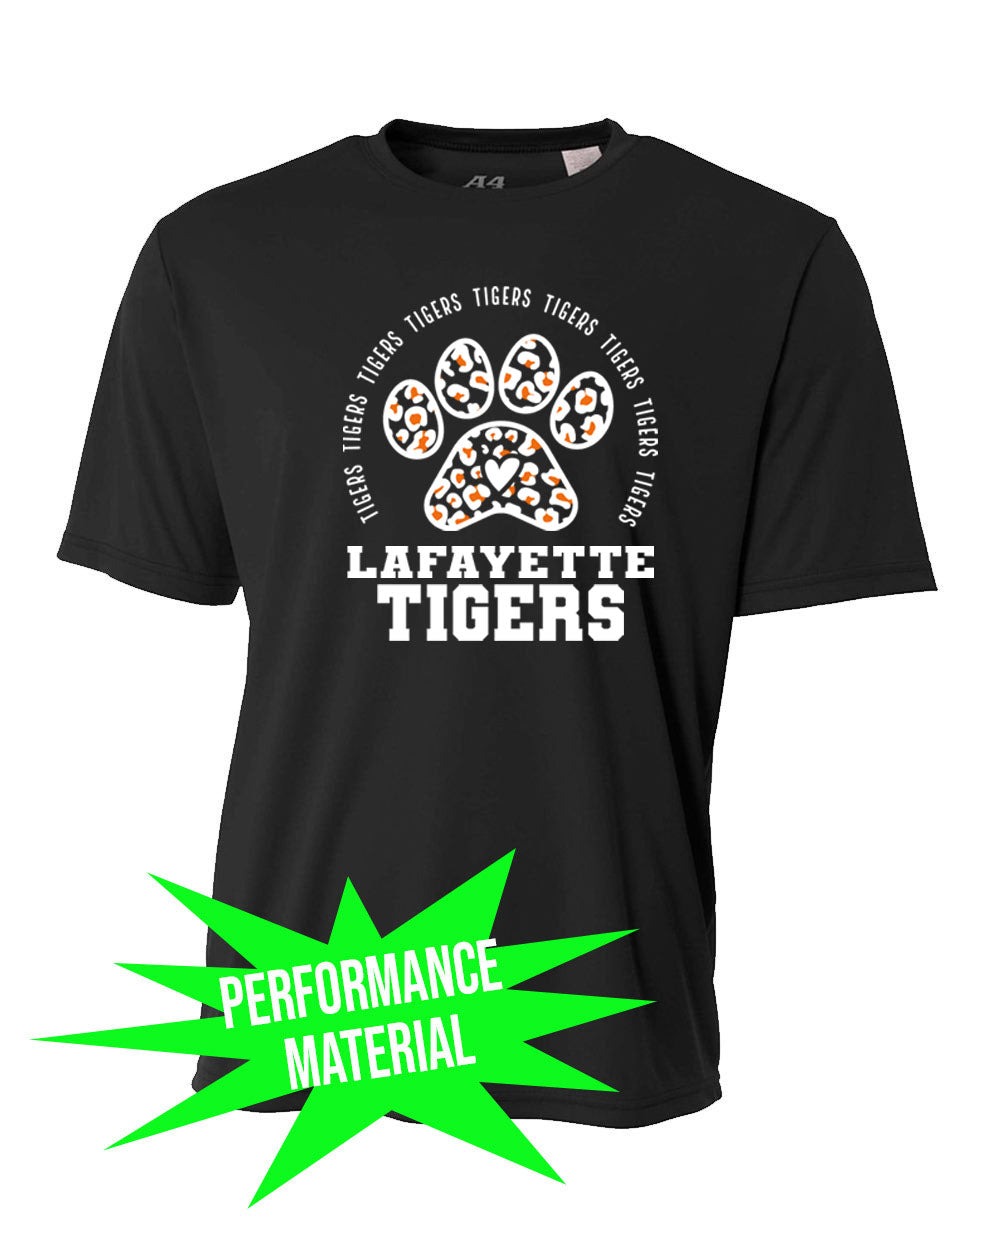 Tigers Design 9 Performance Material T-Shirt